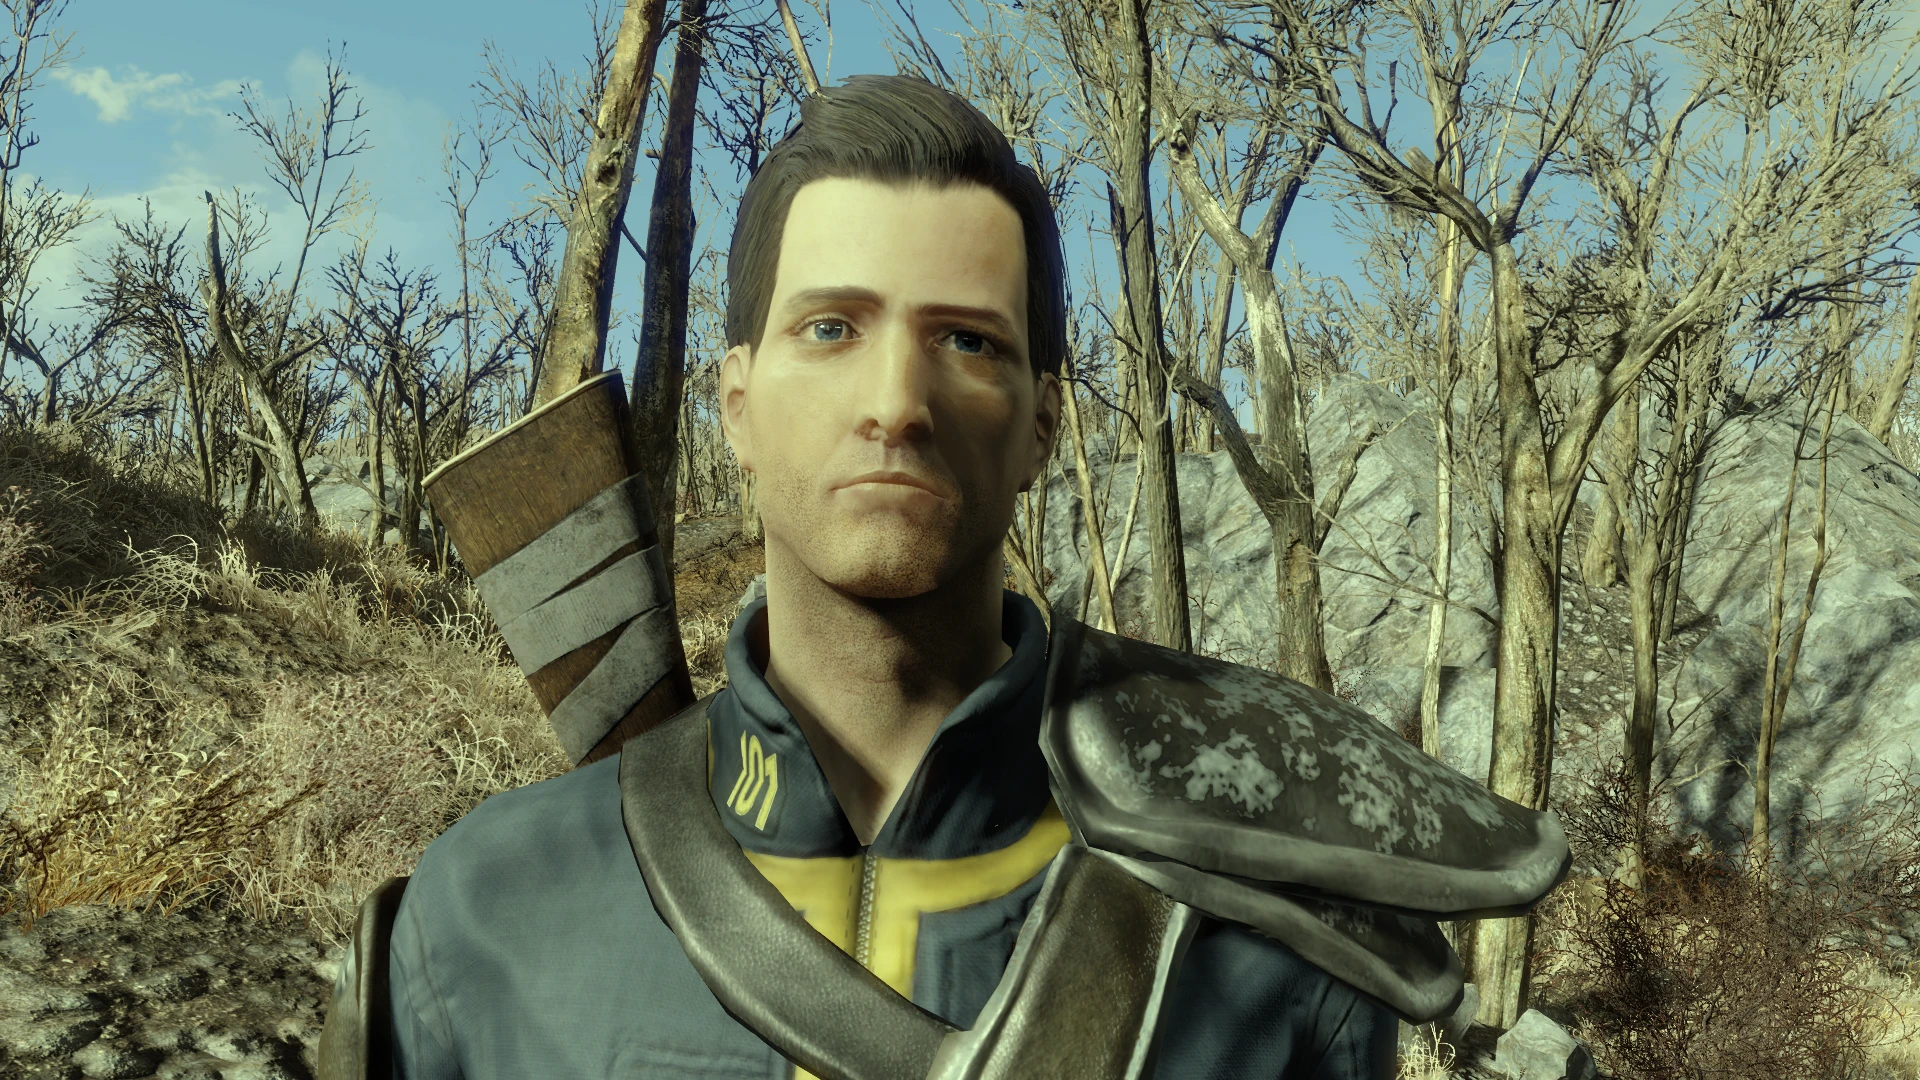 Lone Wanderer Preset (Fallout 3) at Fallout 4 Nexus - Mods and community.